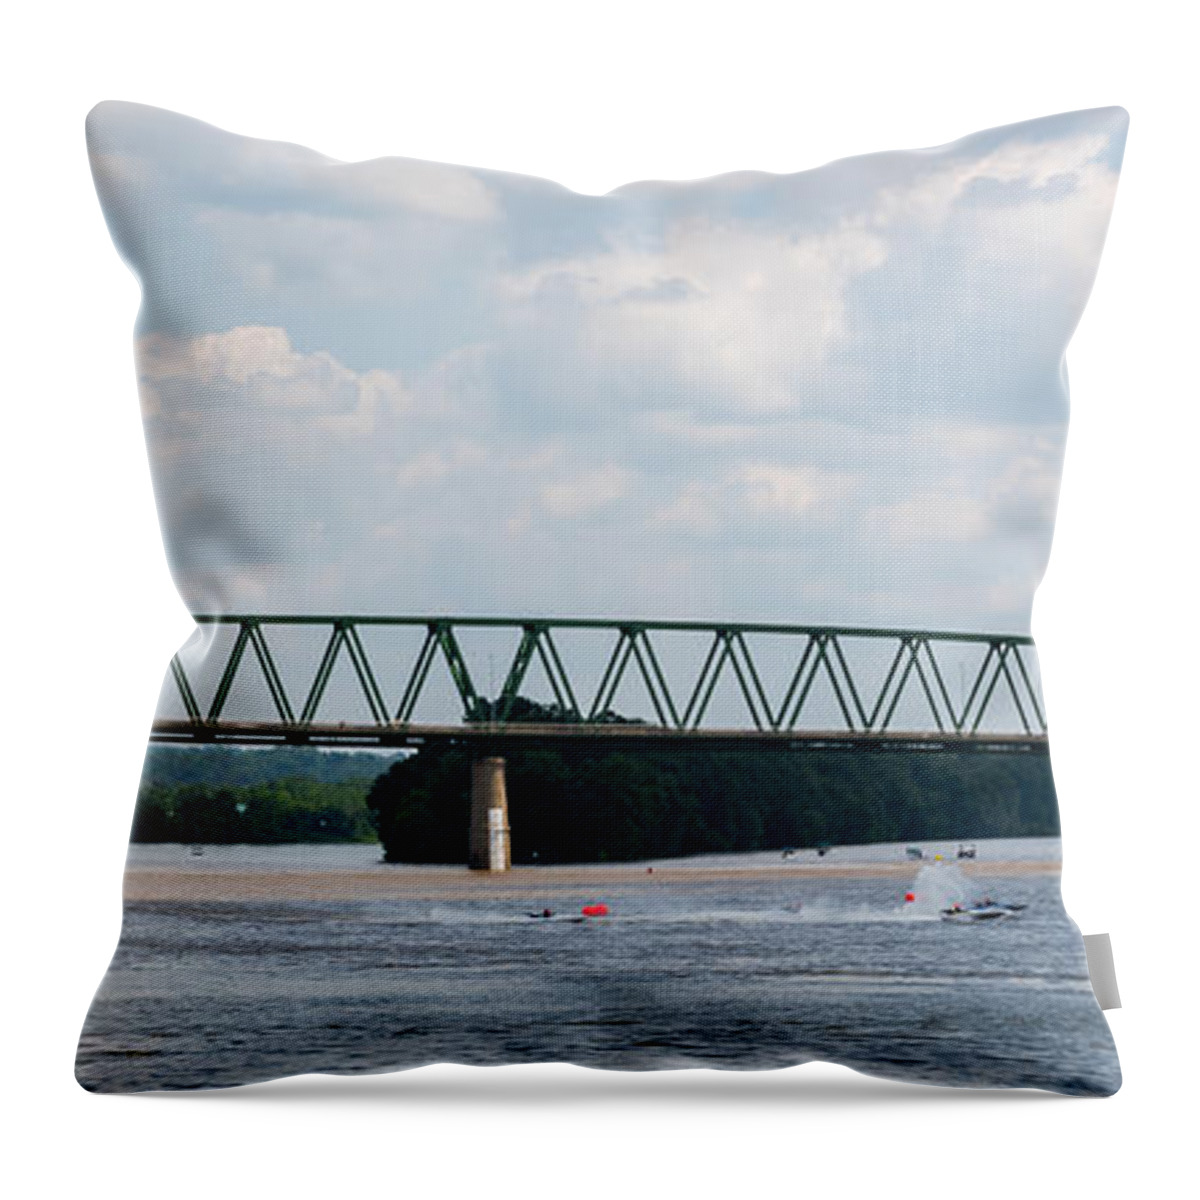 Riverfront Roar Throw Pillow featuring the photograph Riverfront Roar 2015 by Holden The Moment